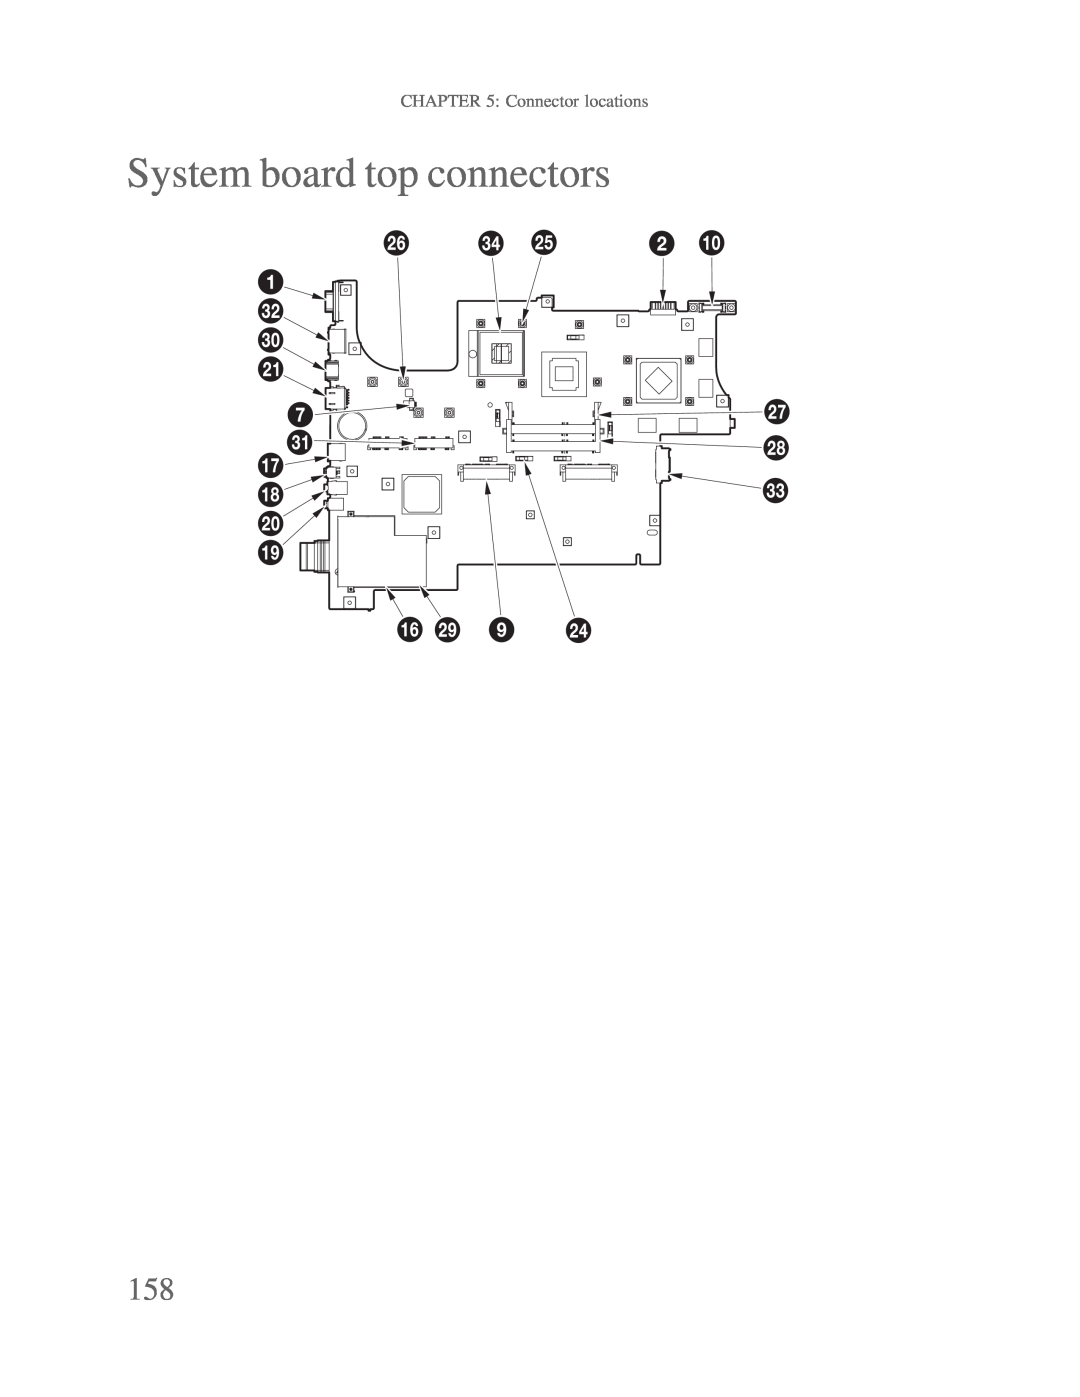 Gateway p-79 manual System board top connectors, Connector locations 